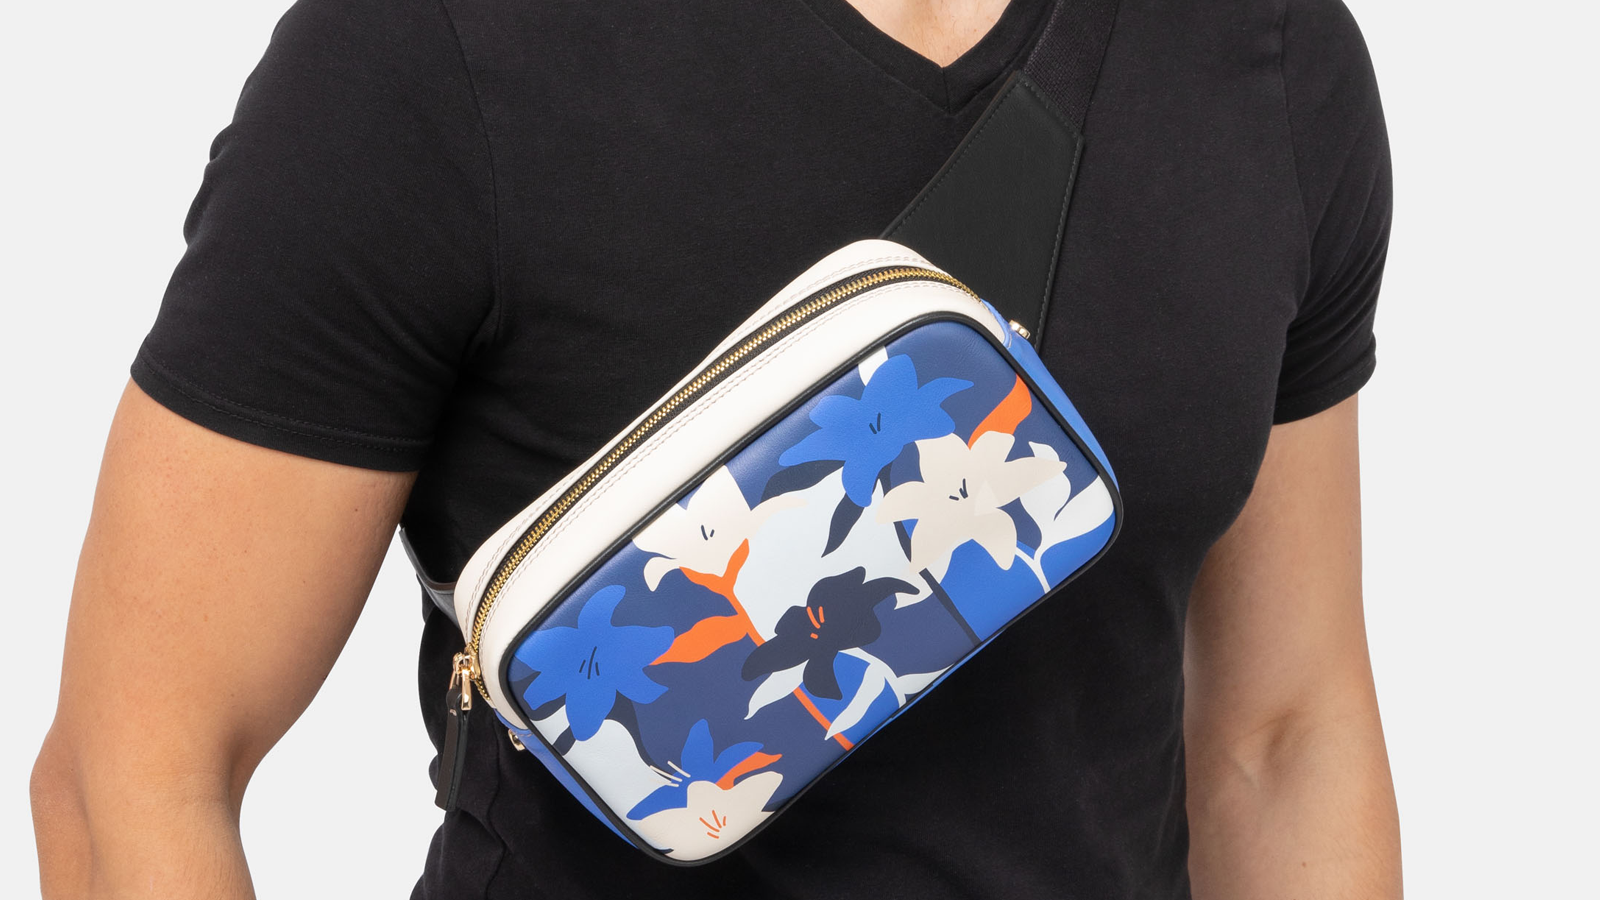 sell your art prints on Crossbody Bags with your own brand